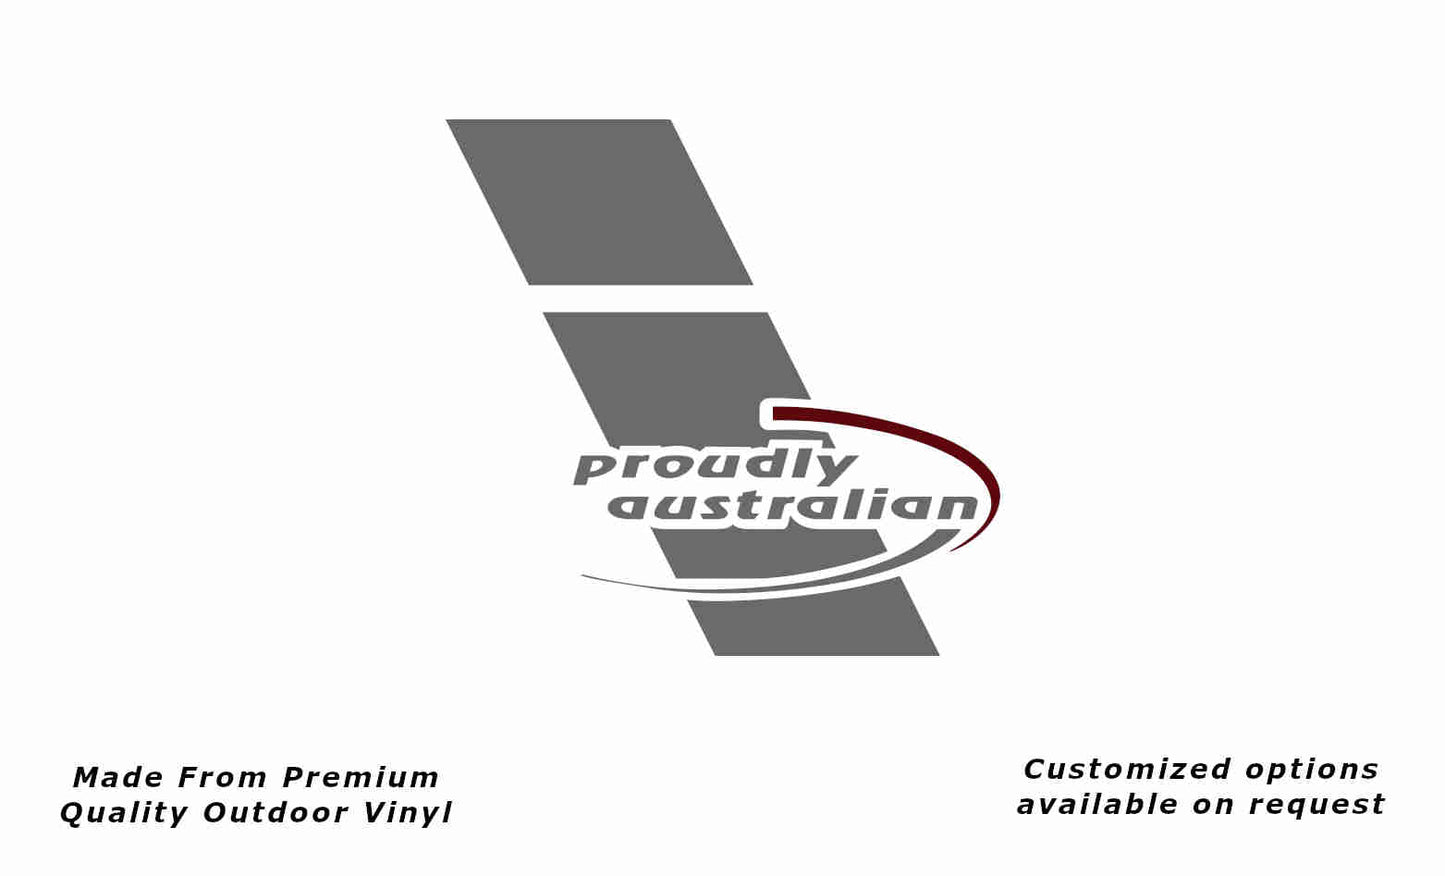 Avan proudly australian drivers side v2 caravan replacement vinyl decal sticker in silver grey and purple red.